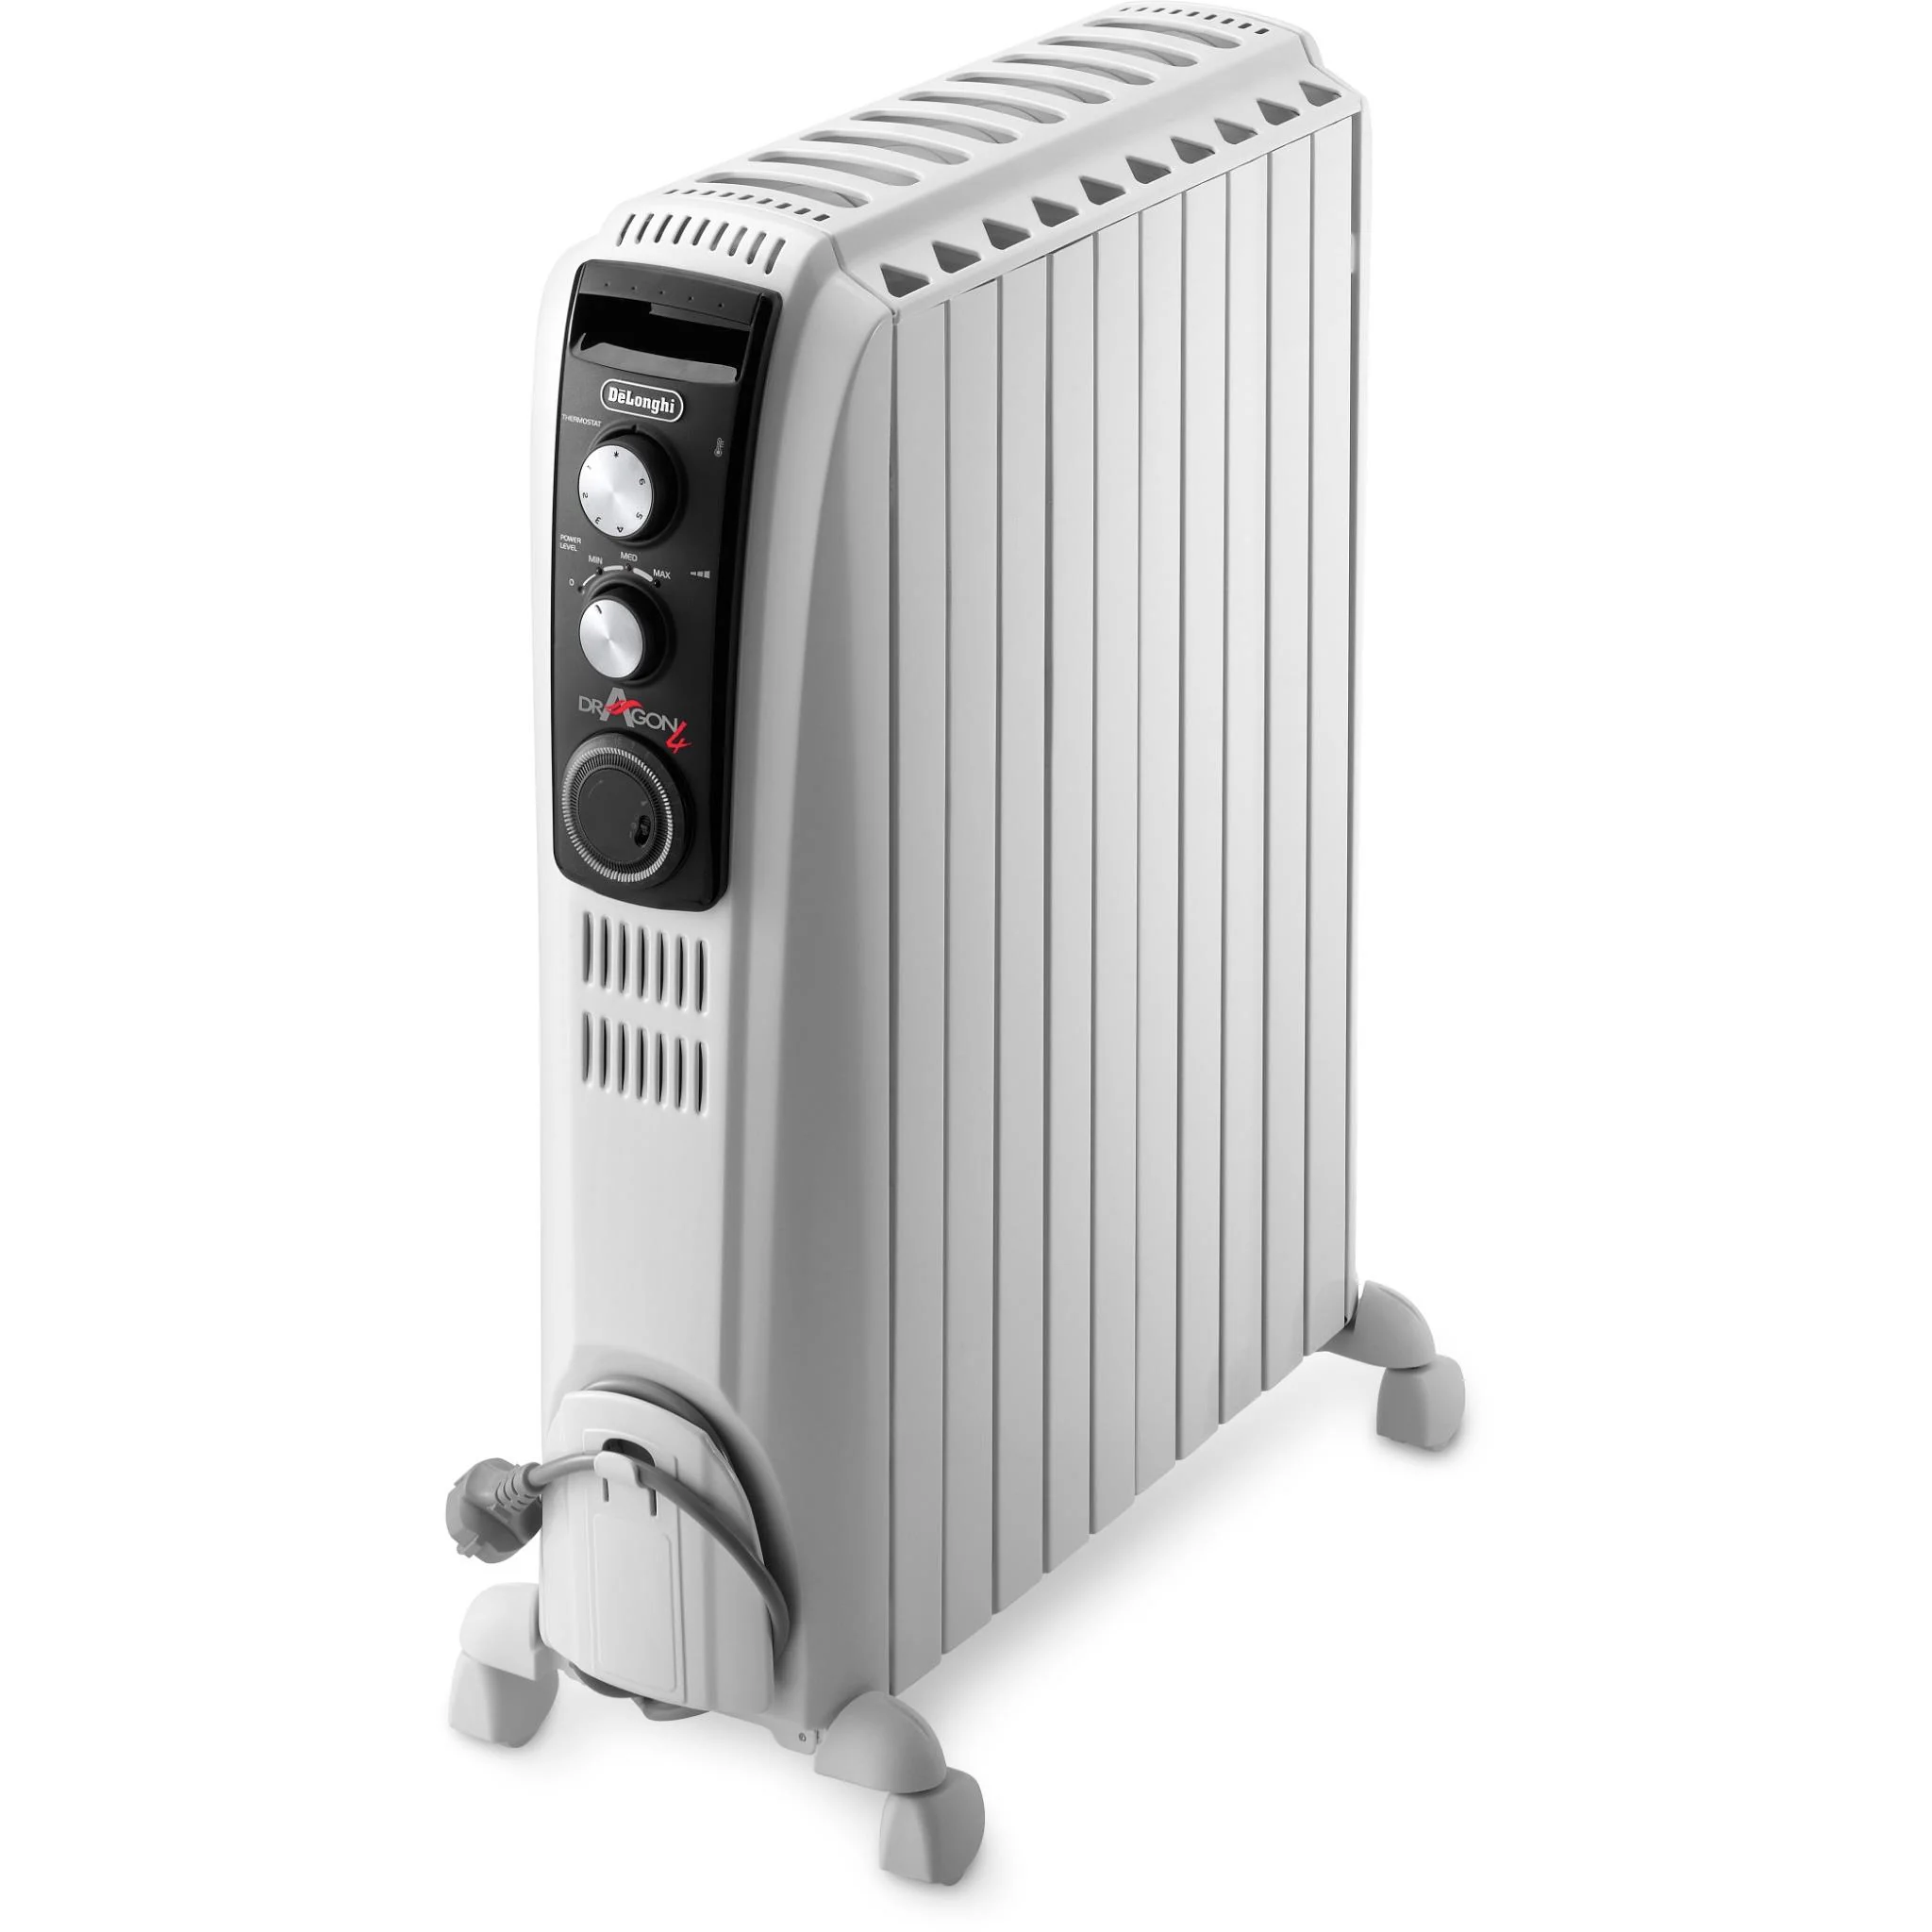 DeLonghi Dragon4 Oil Column Heater With Timer